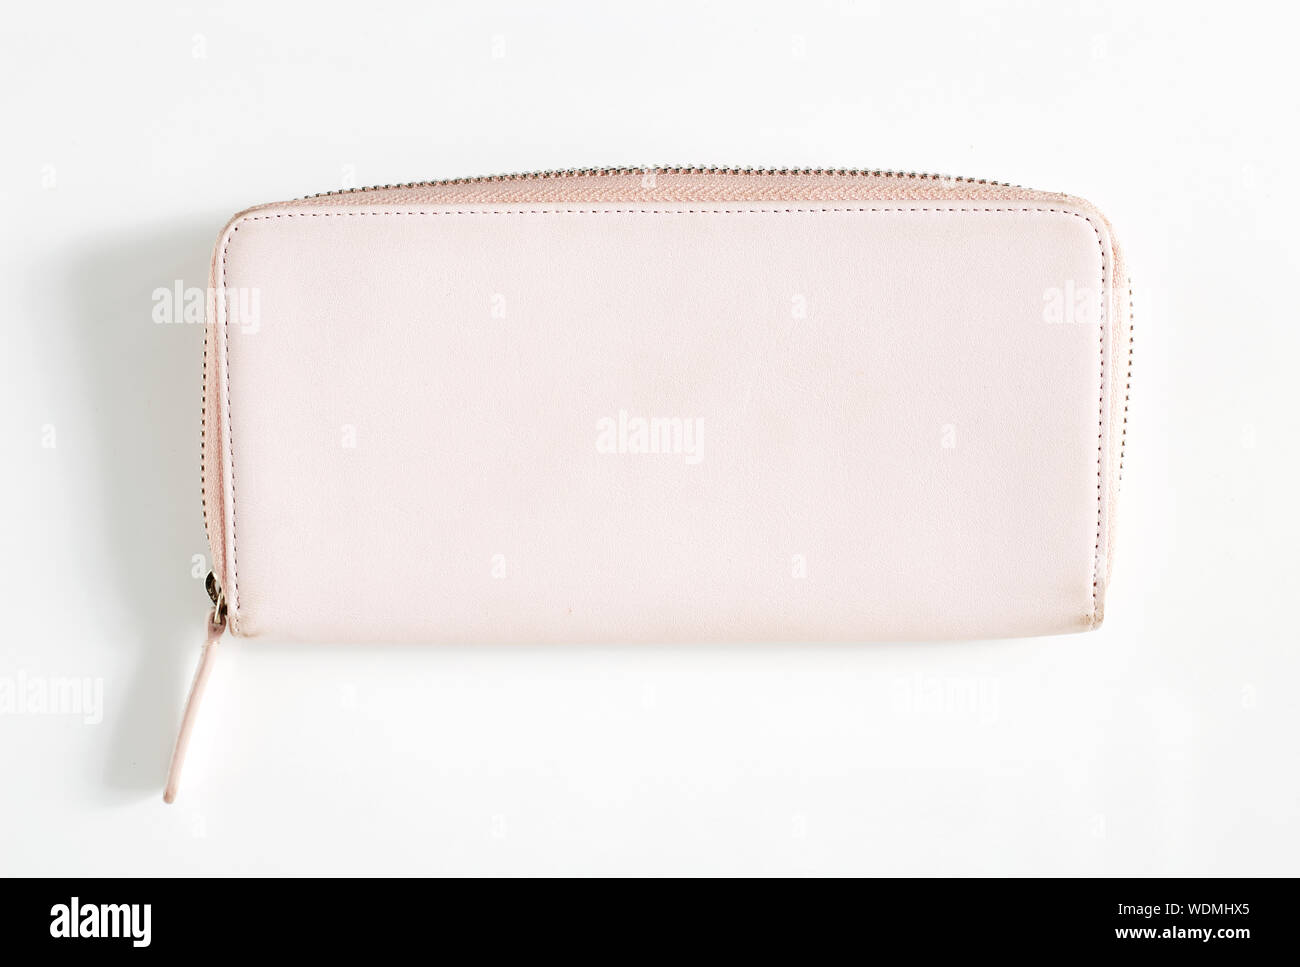 Directly Above Shot Of Clutch Bag On White Background Stock Photo